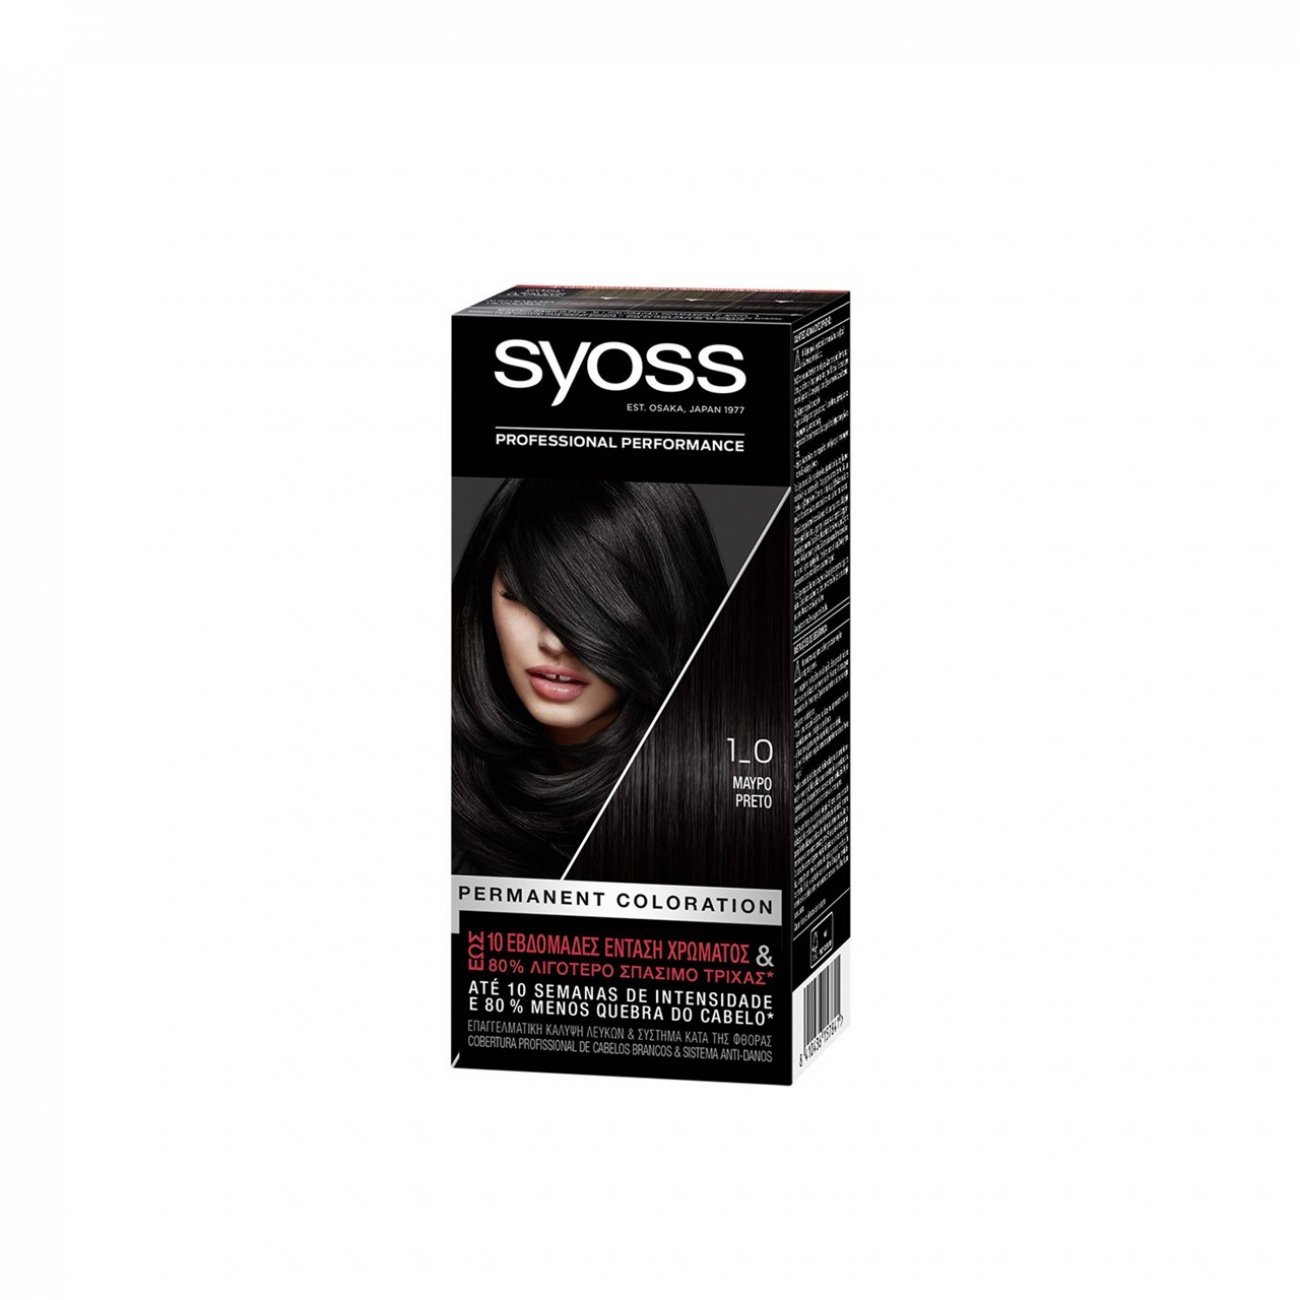 Buy Syoss Permanent Coloration 1_0 Black Permanent Hair Dye · Germany